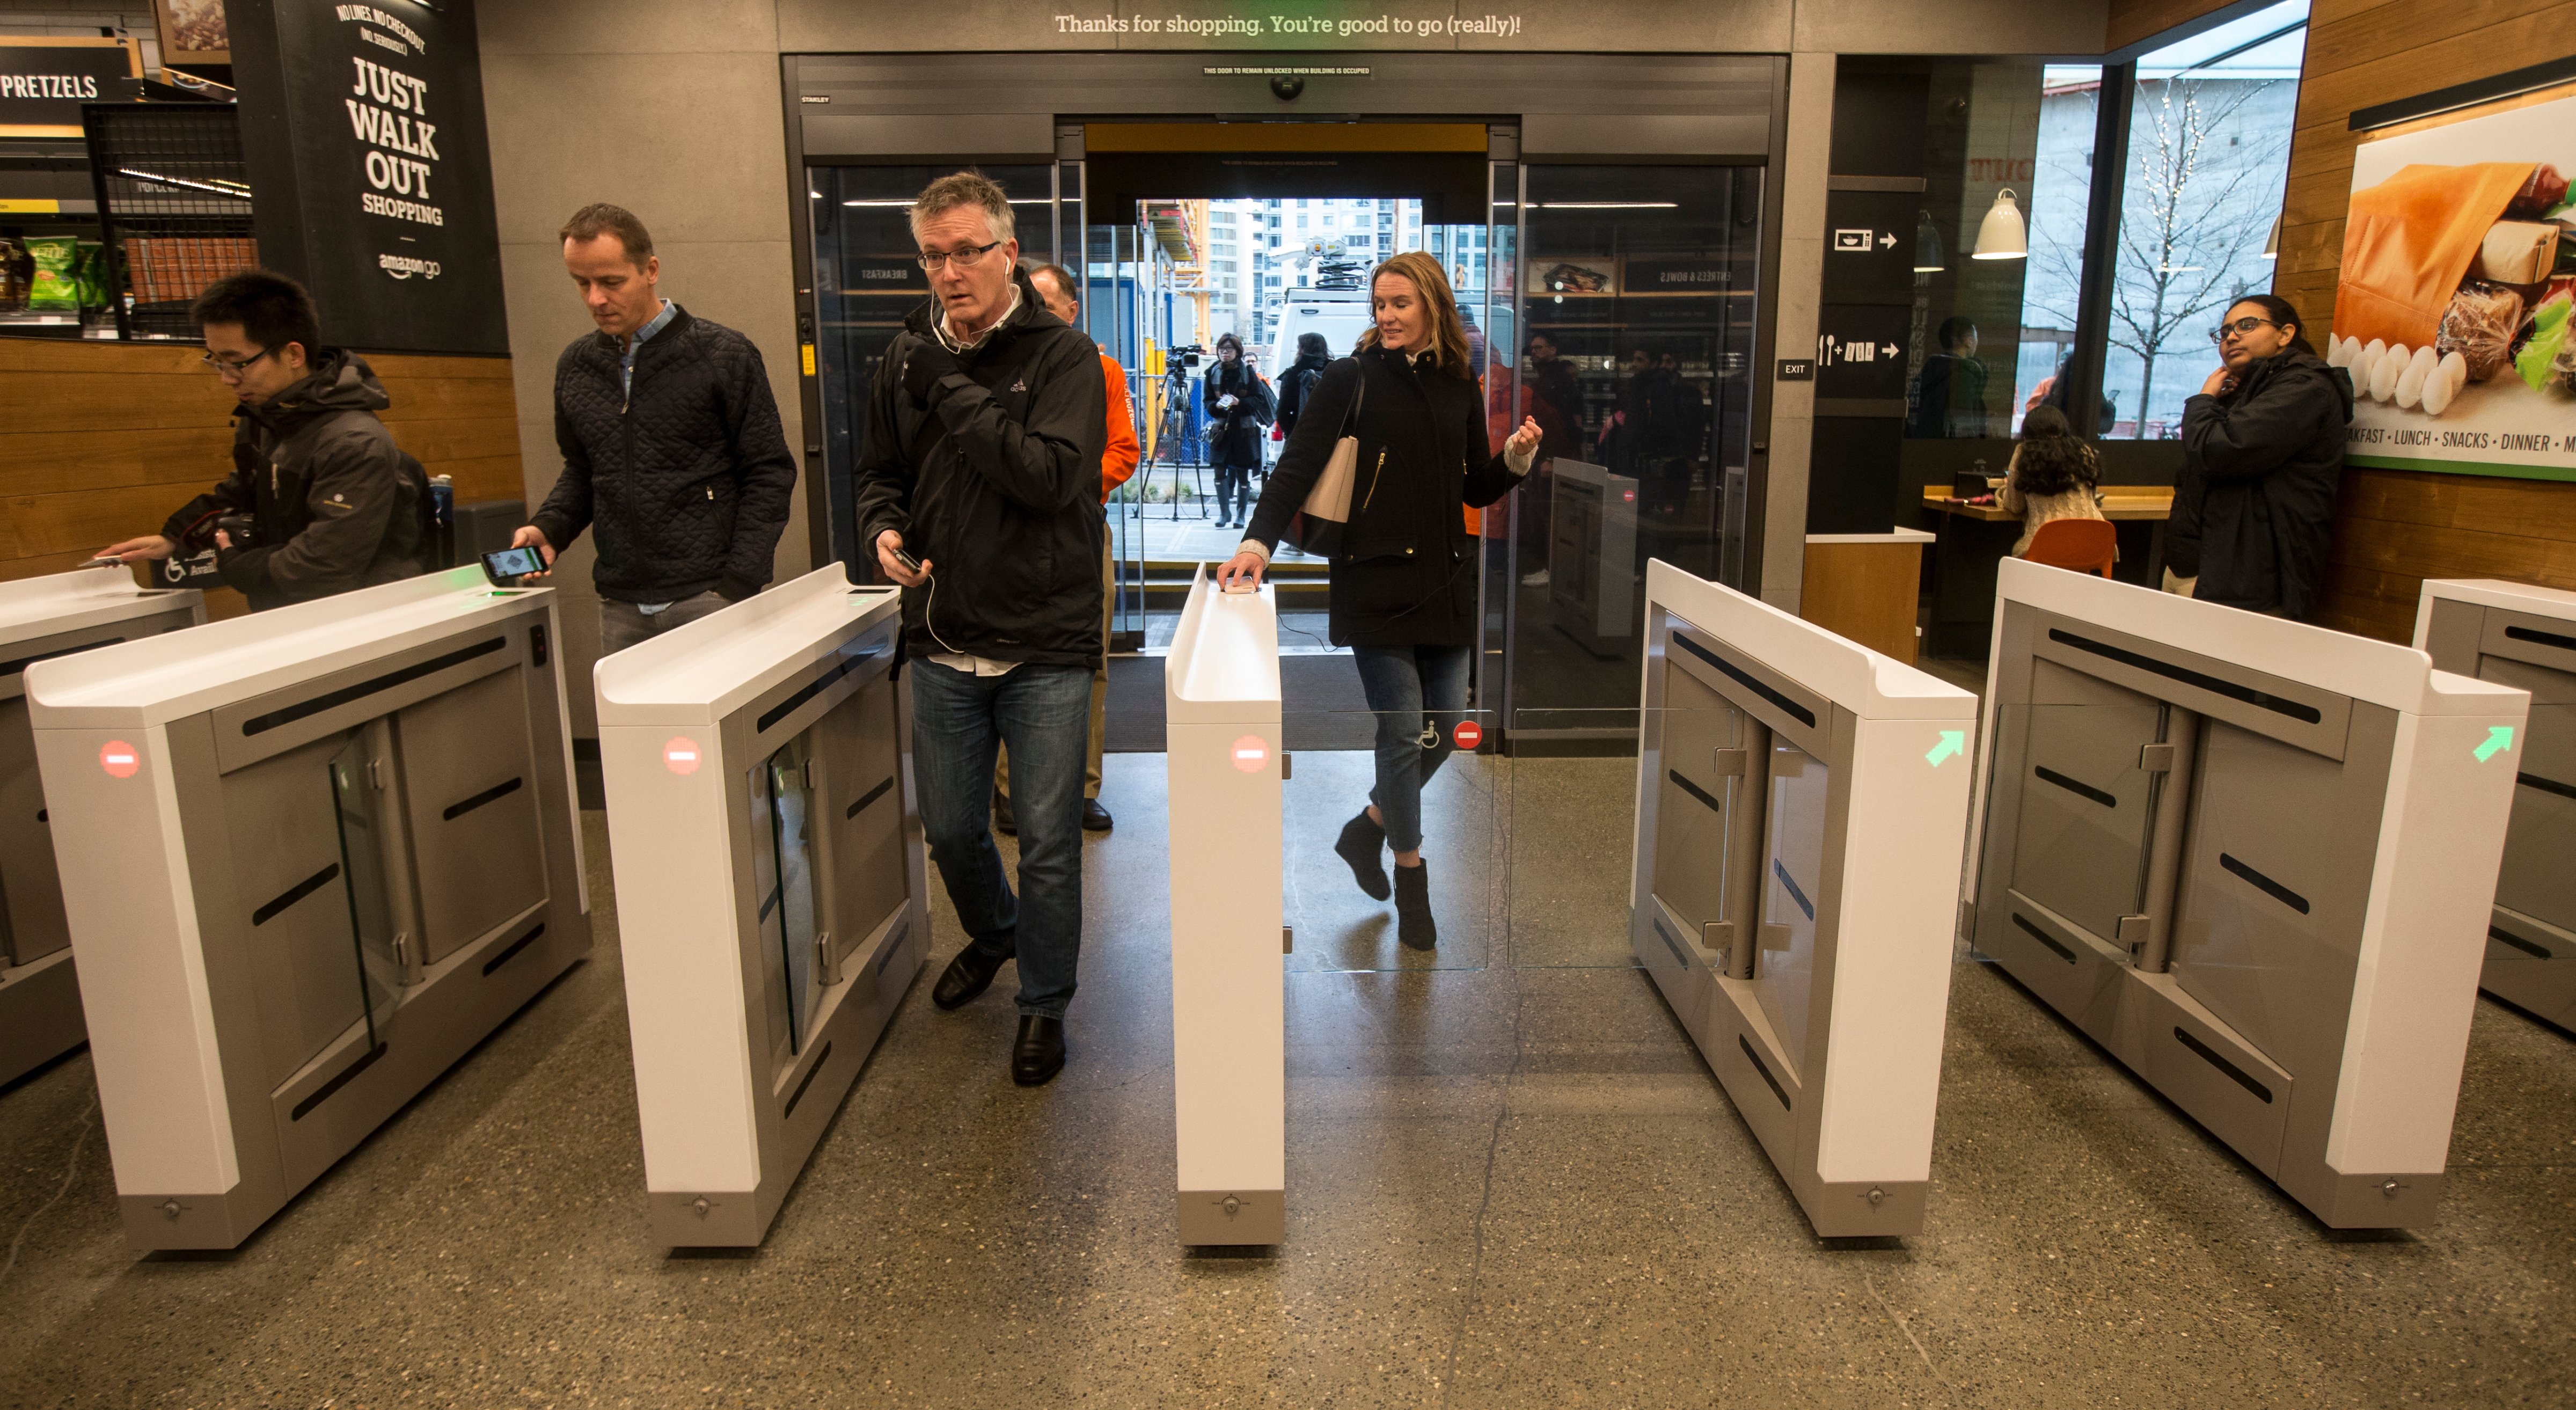 Shoppers scan the Amazon Go app on the mobile devices as the enter the Amazon Go store, on January 22, 2018 in Seattle, Washington. (Stephen Brashear&mdash;Getty Images)